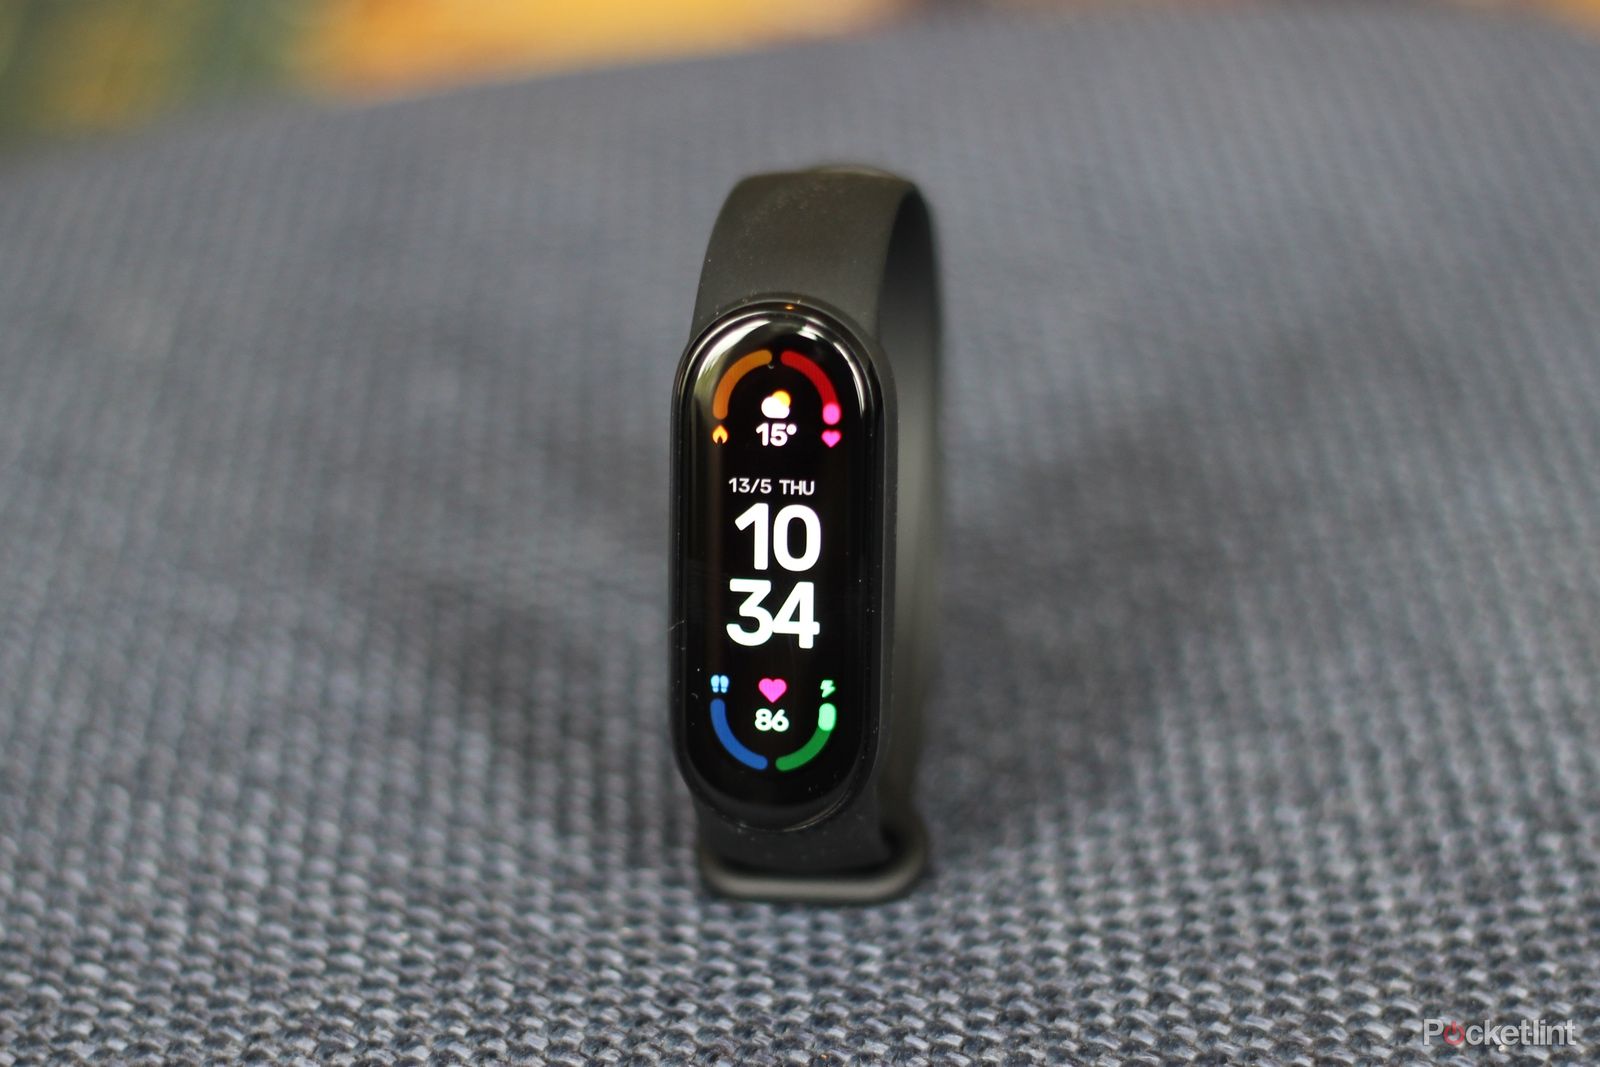 Xiaomi Mi Band 5 Review: $45 Fitness Tracker Packs More Features Than  Rivals For Half The Price